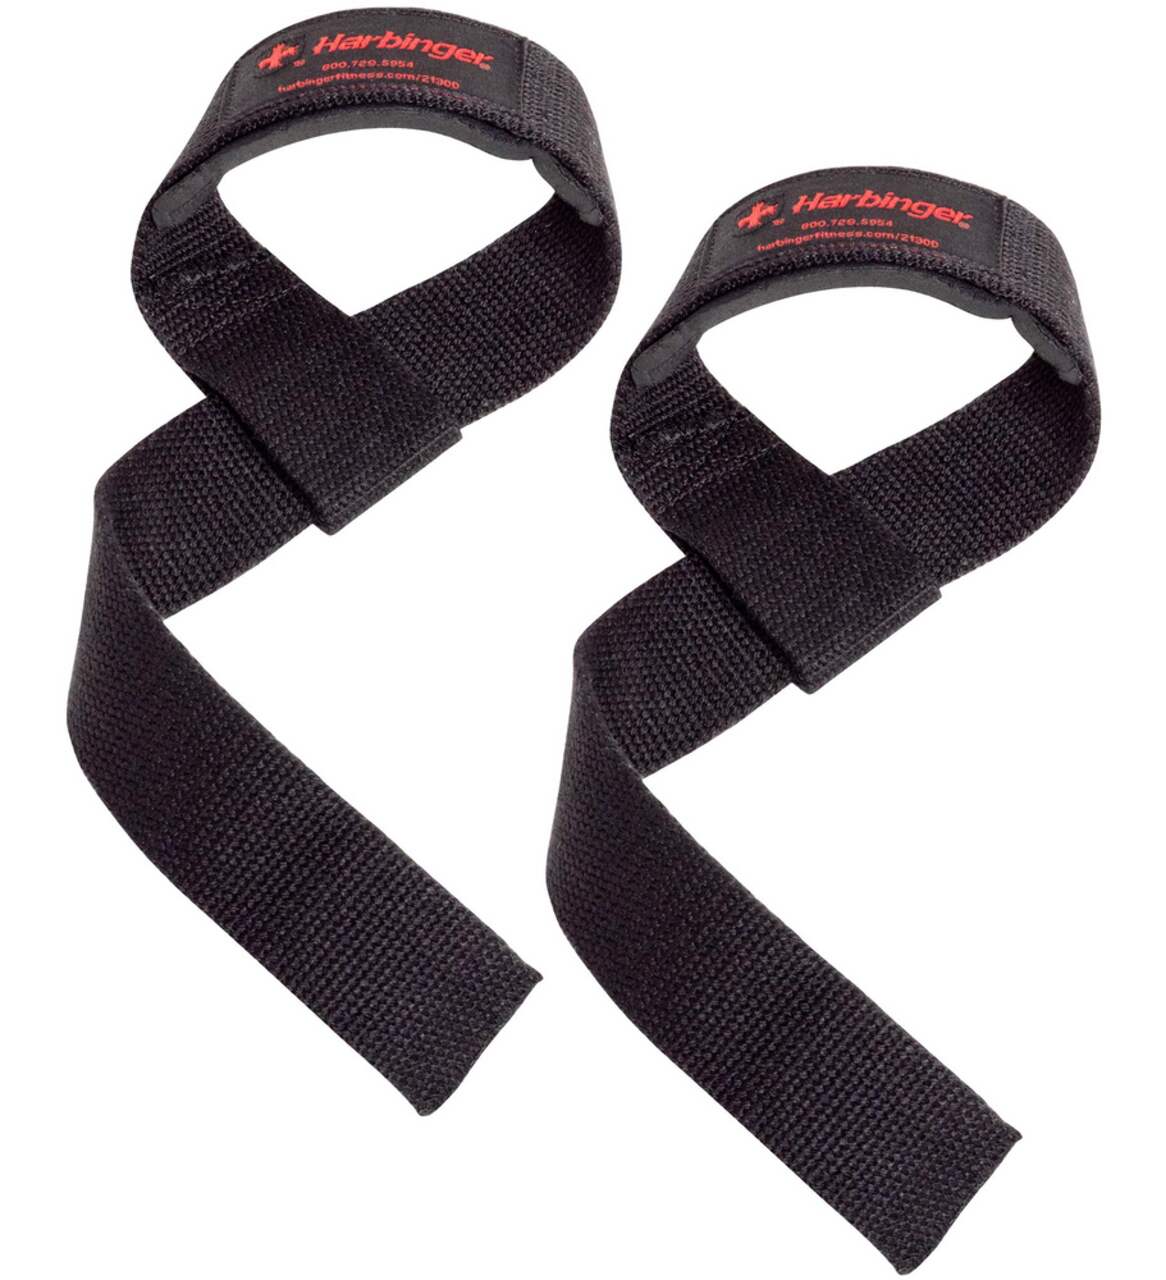 Harbinger Padded Cotton Weight Lifting Straps, 20.5-in, 2-pc